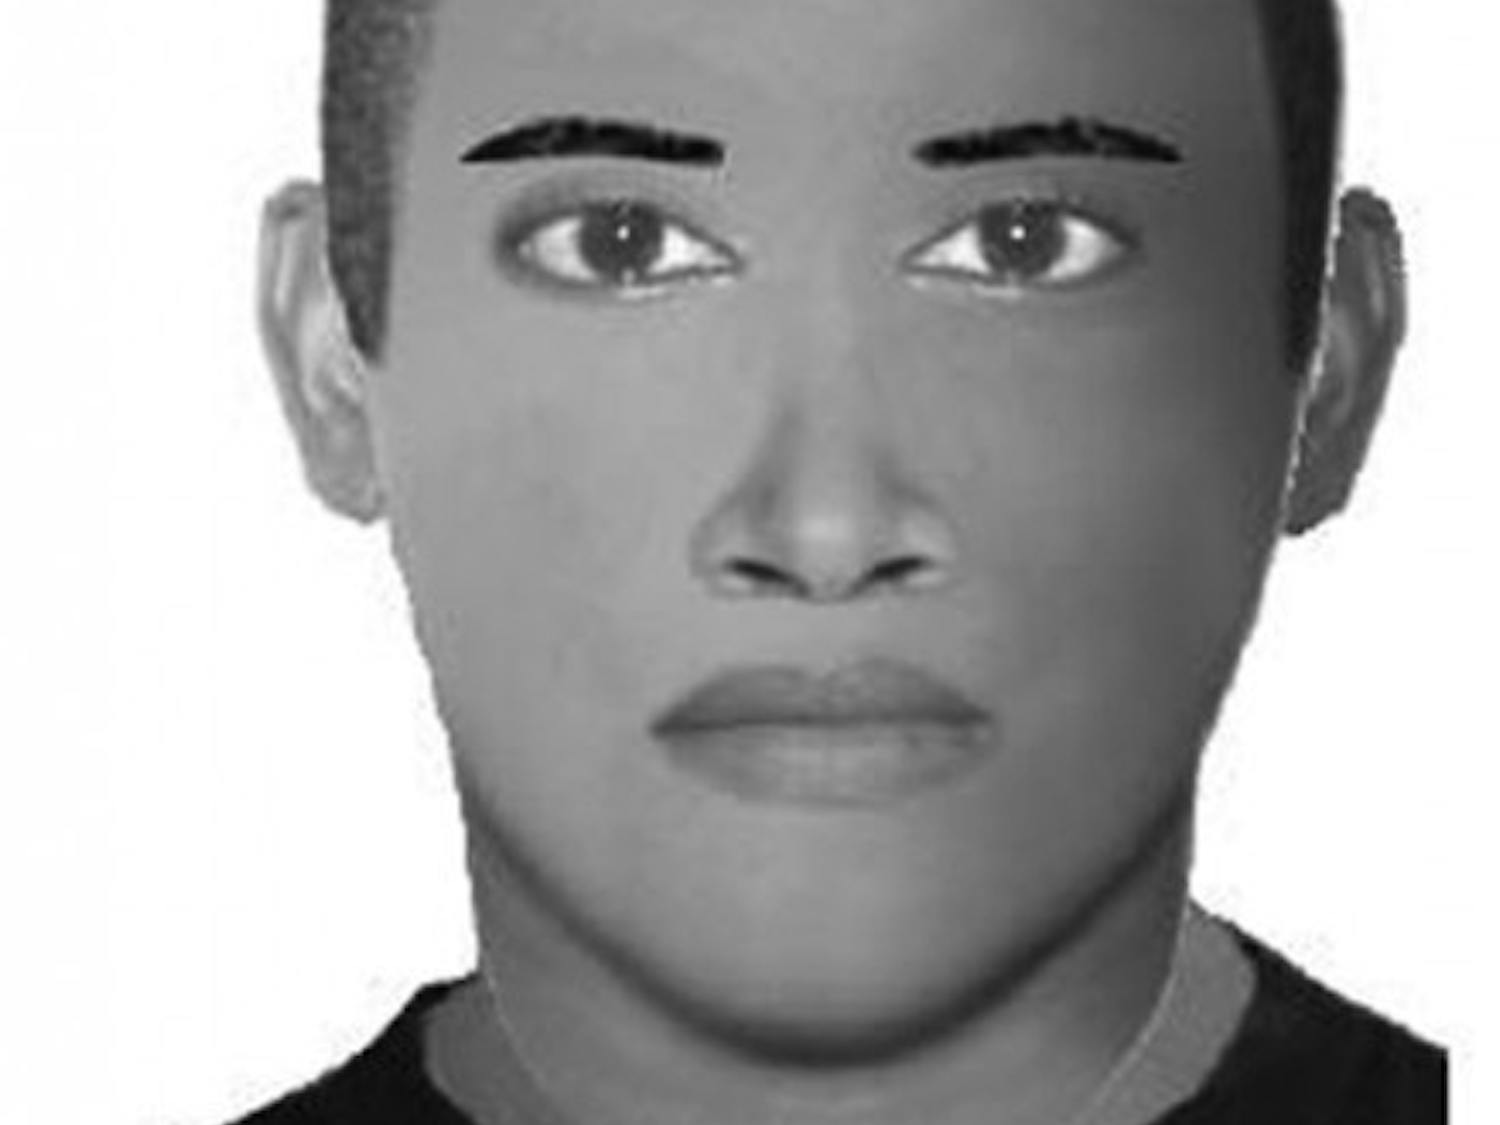 This digital composite depicts the suspect.